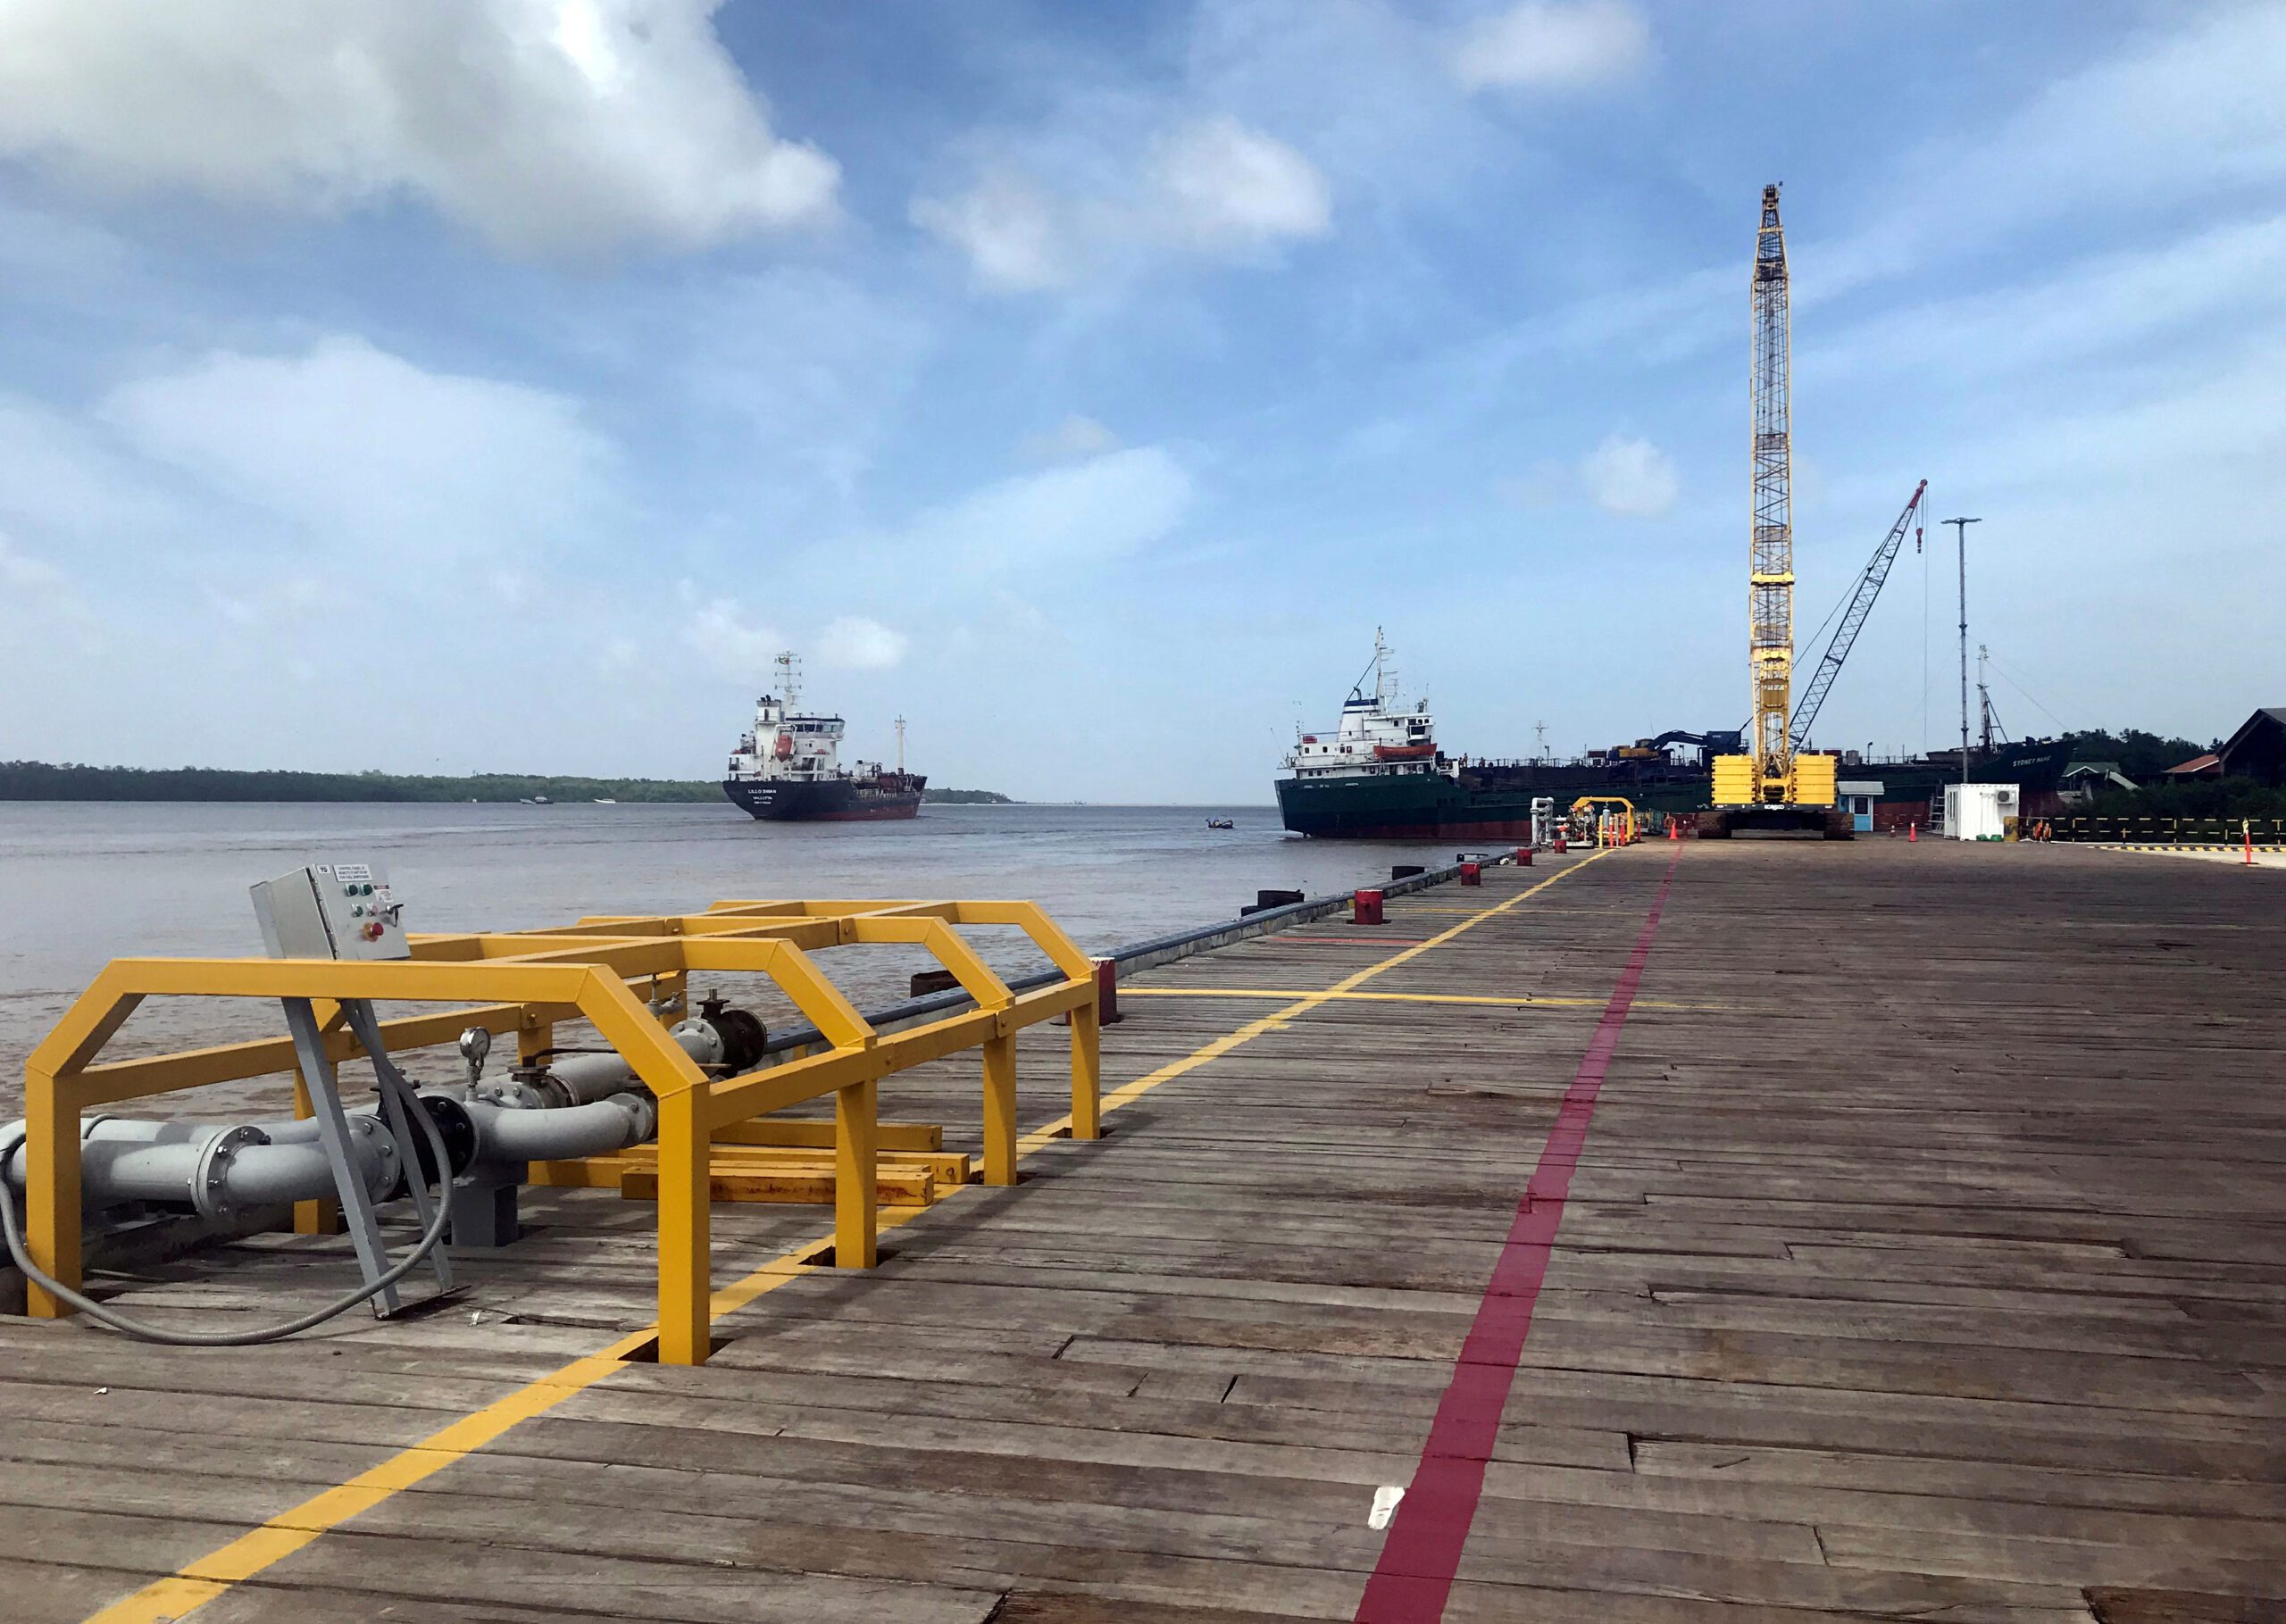 FILE PHOTO: Vessels carrying supplies for an offshore oil platform operated by Exxon Mobil are seen at the Guyana Shore Base Inc wharf on the Demerara River, south of Georgetown, Guyana January 23, 2020. REUTERS/Luc Cohen/File Photo/File Photo